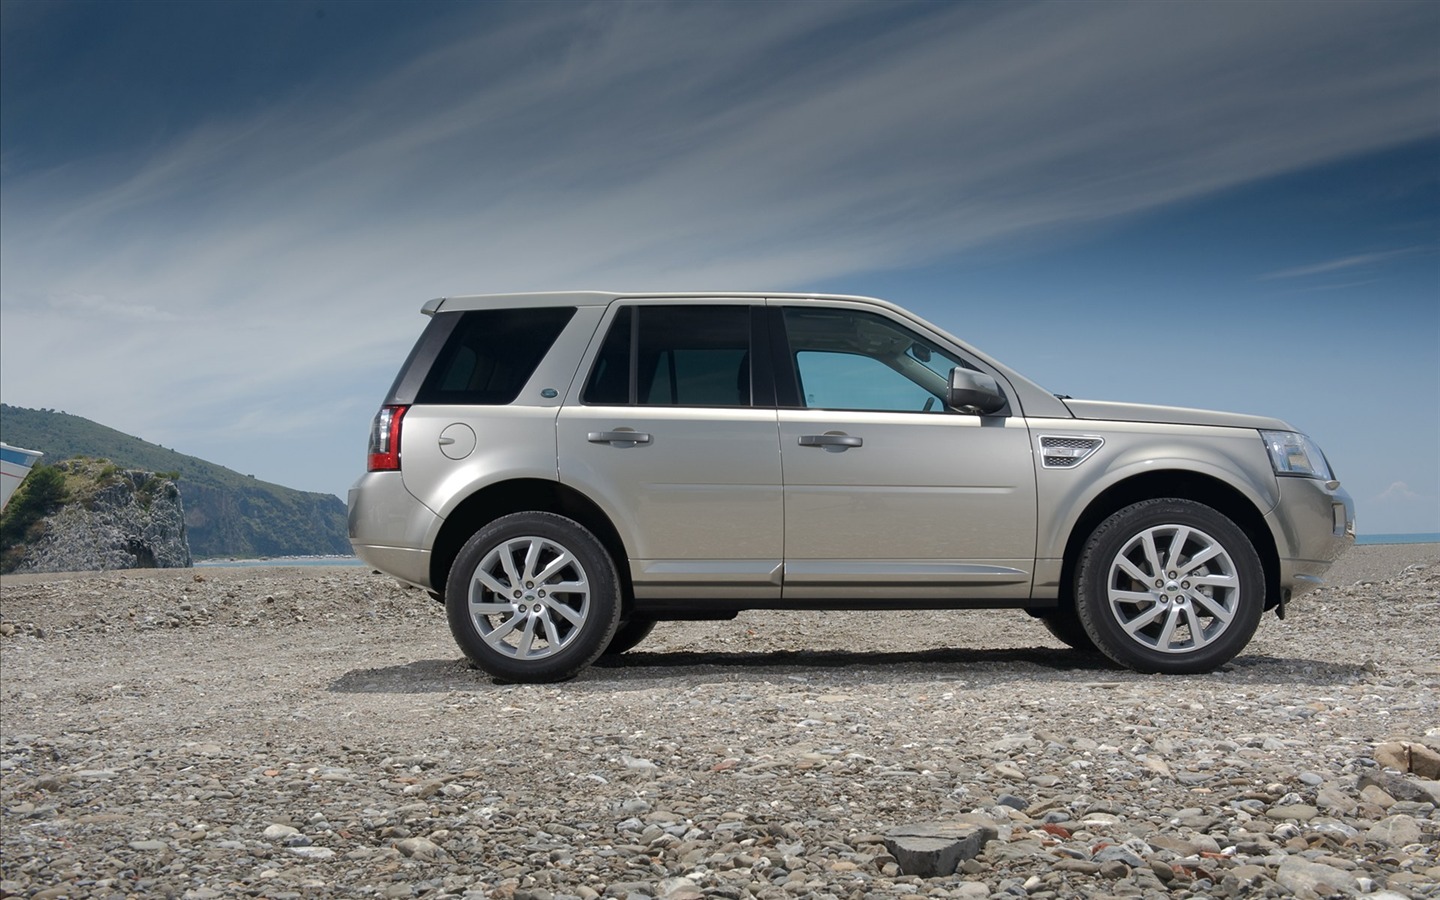 Land Rover wallpapers 2011 (1) #8 - 1440x900